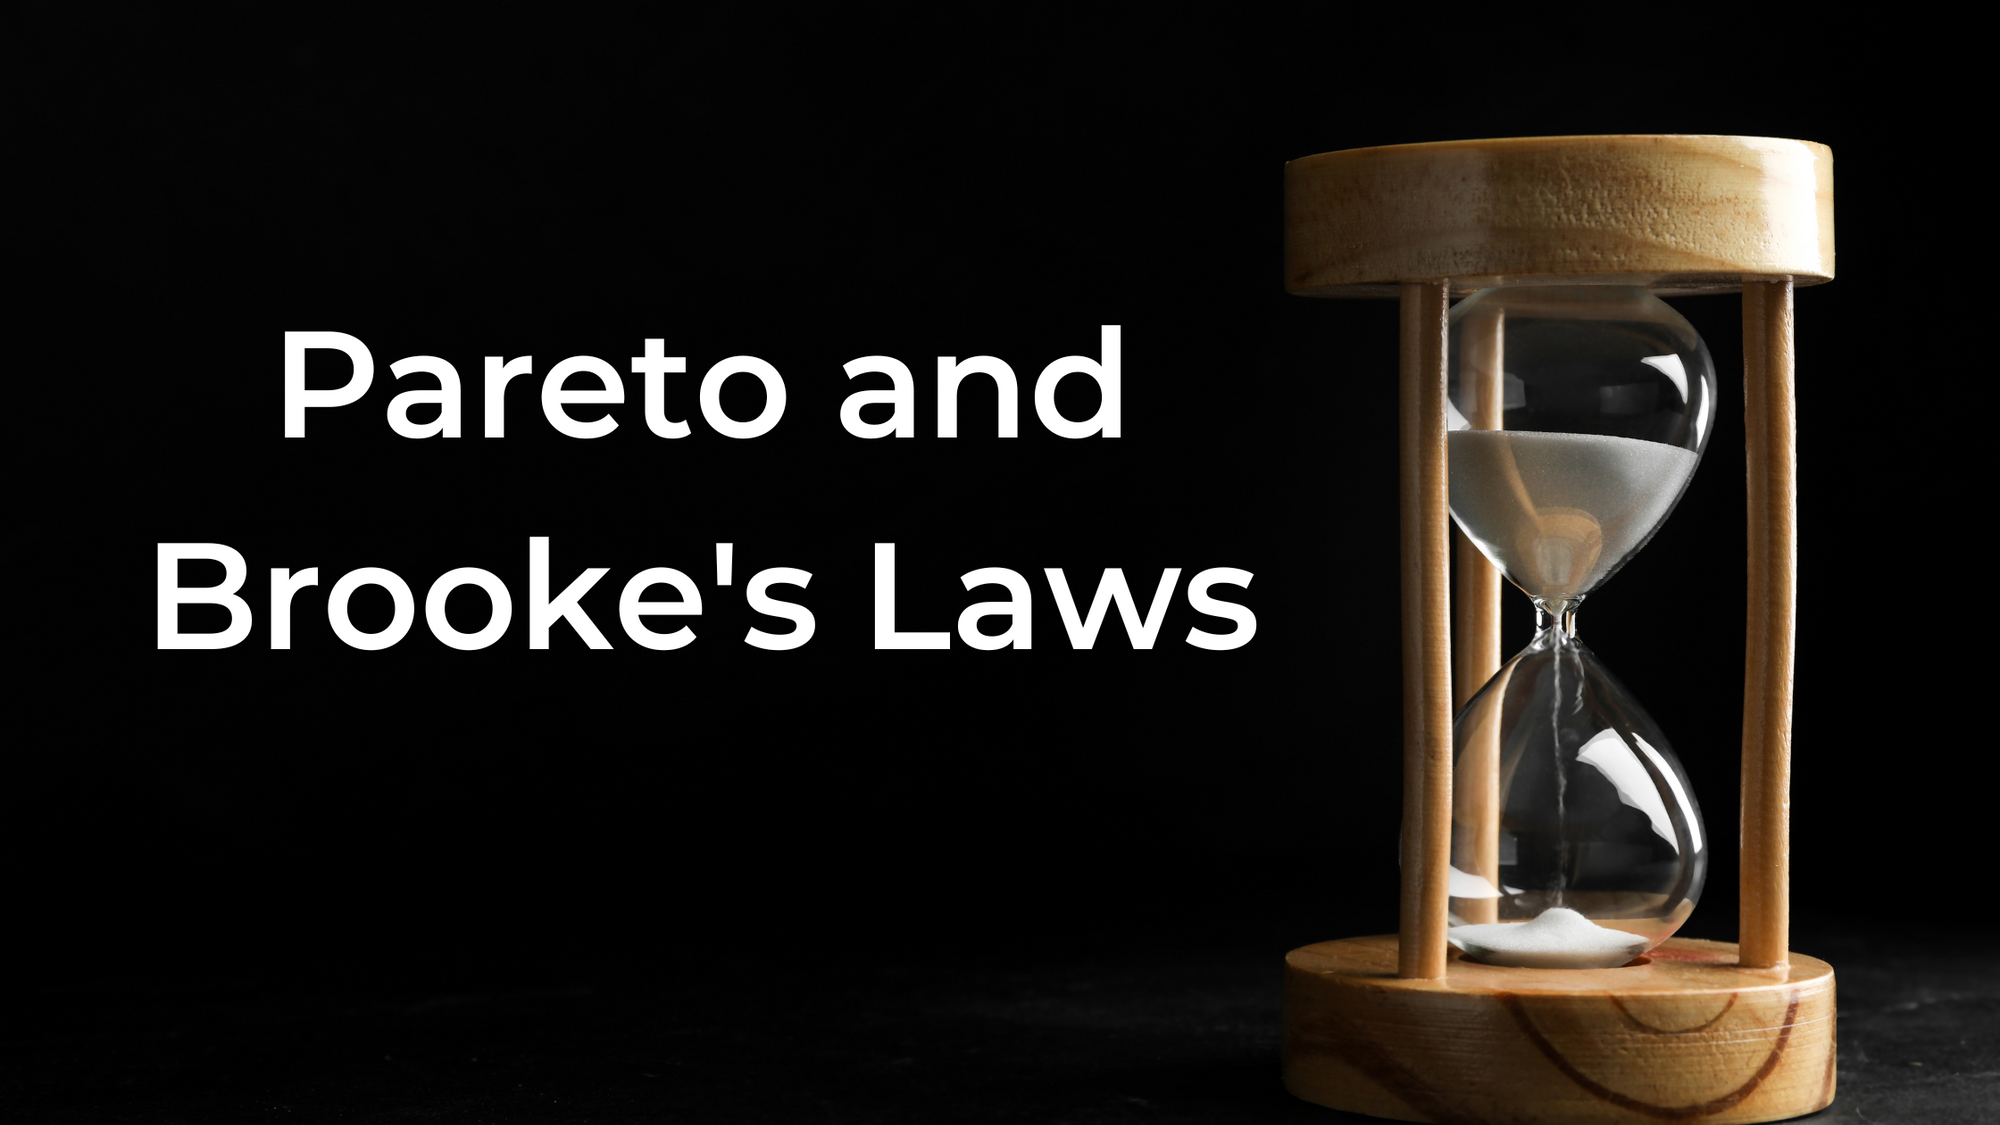 Pareto and Brooke's Laws